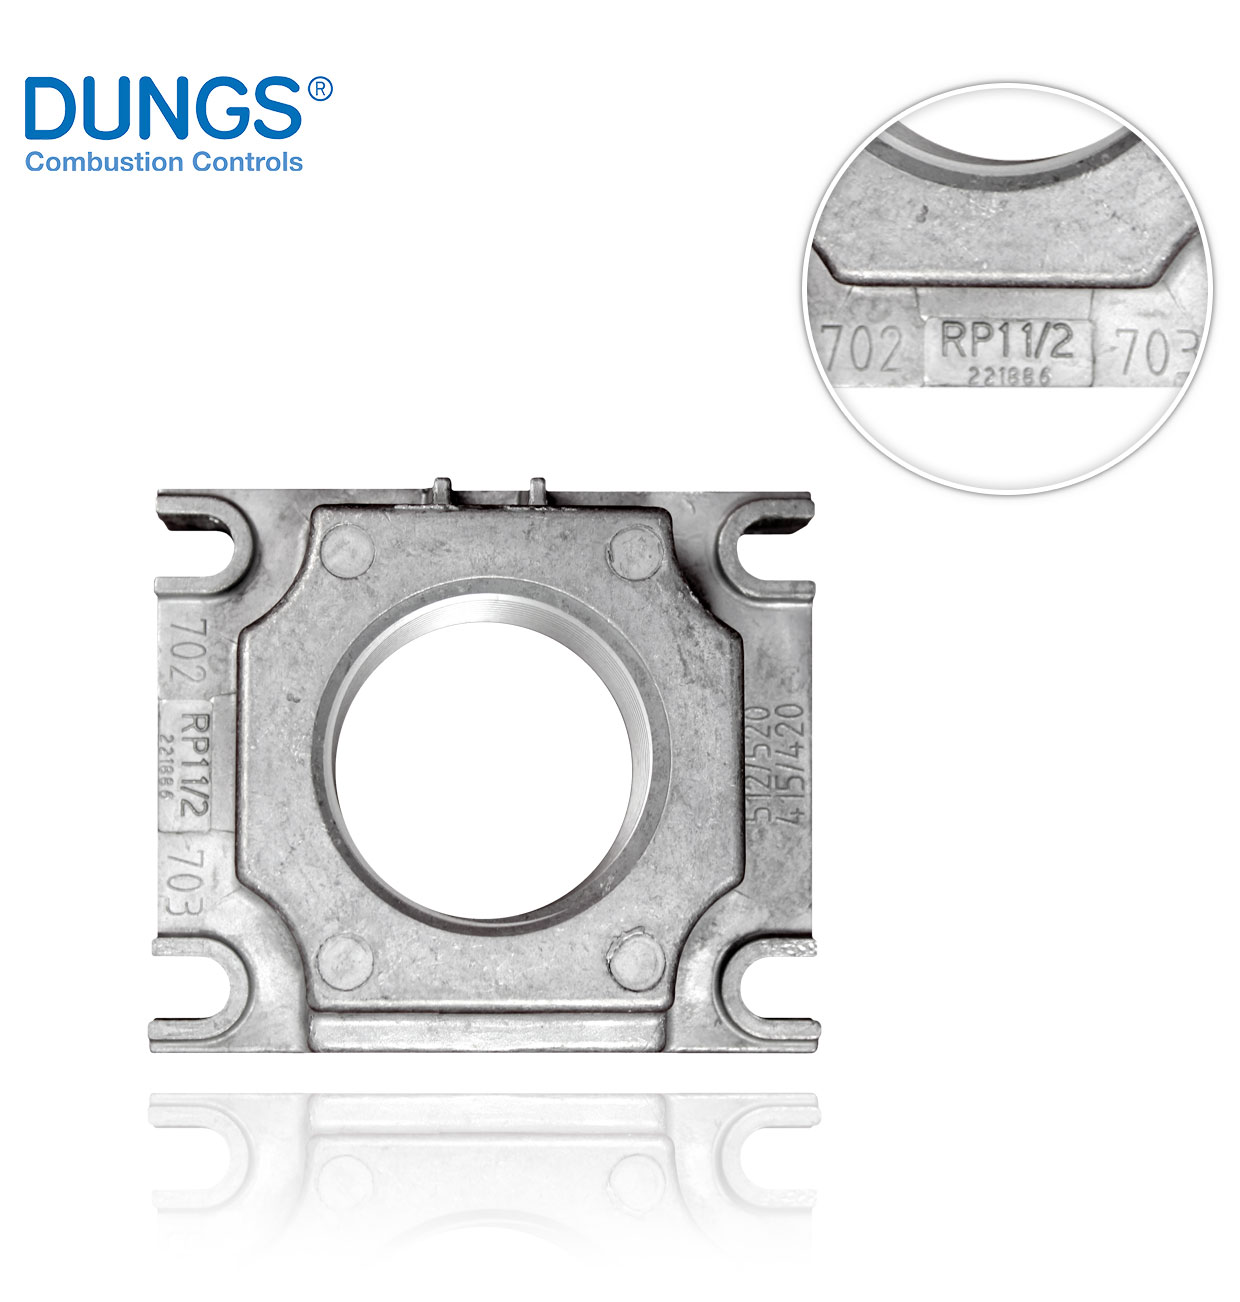 R1"1/2 DUNGS FLANGE WITH PLUG FOR 512/11+520/11 DMV